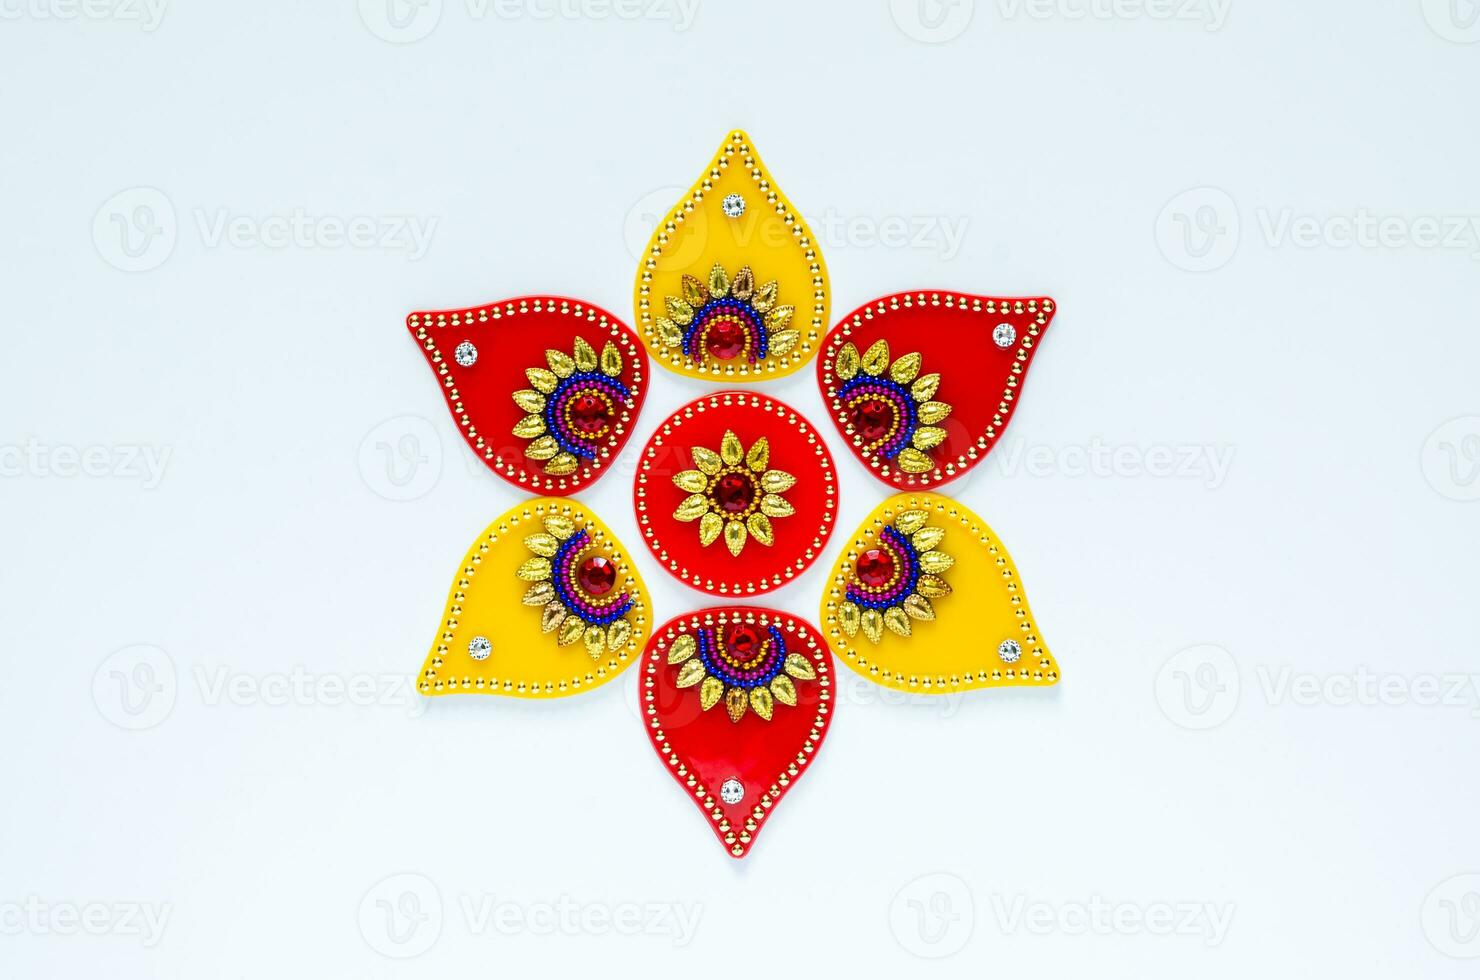 Diwali festival decorative object that can put with diwa lamp for decoration on white background. photo